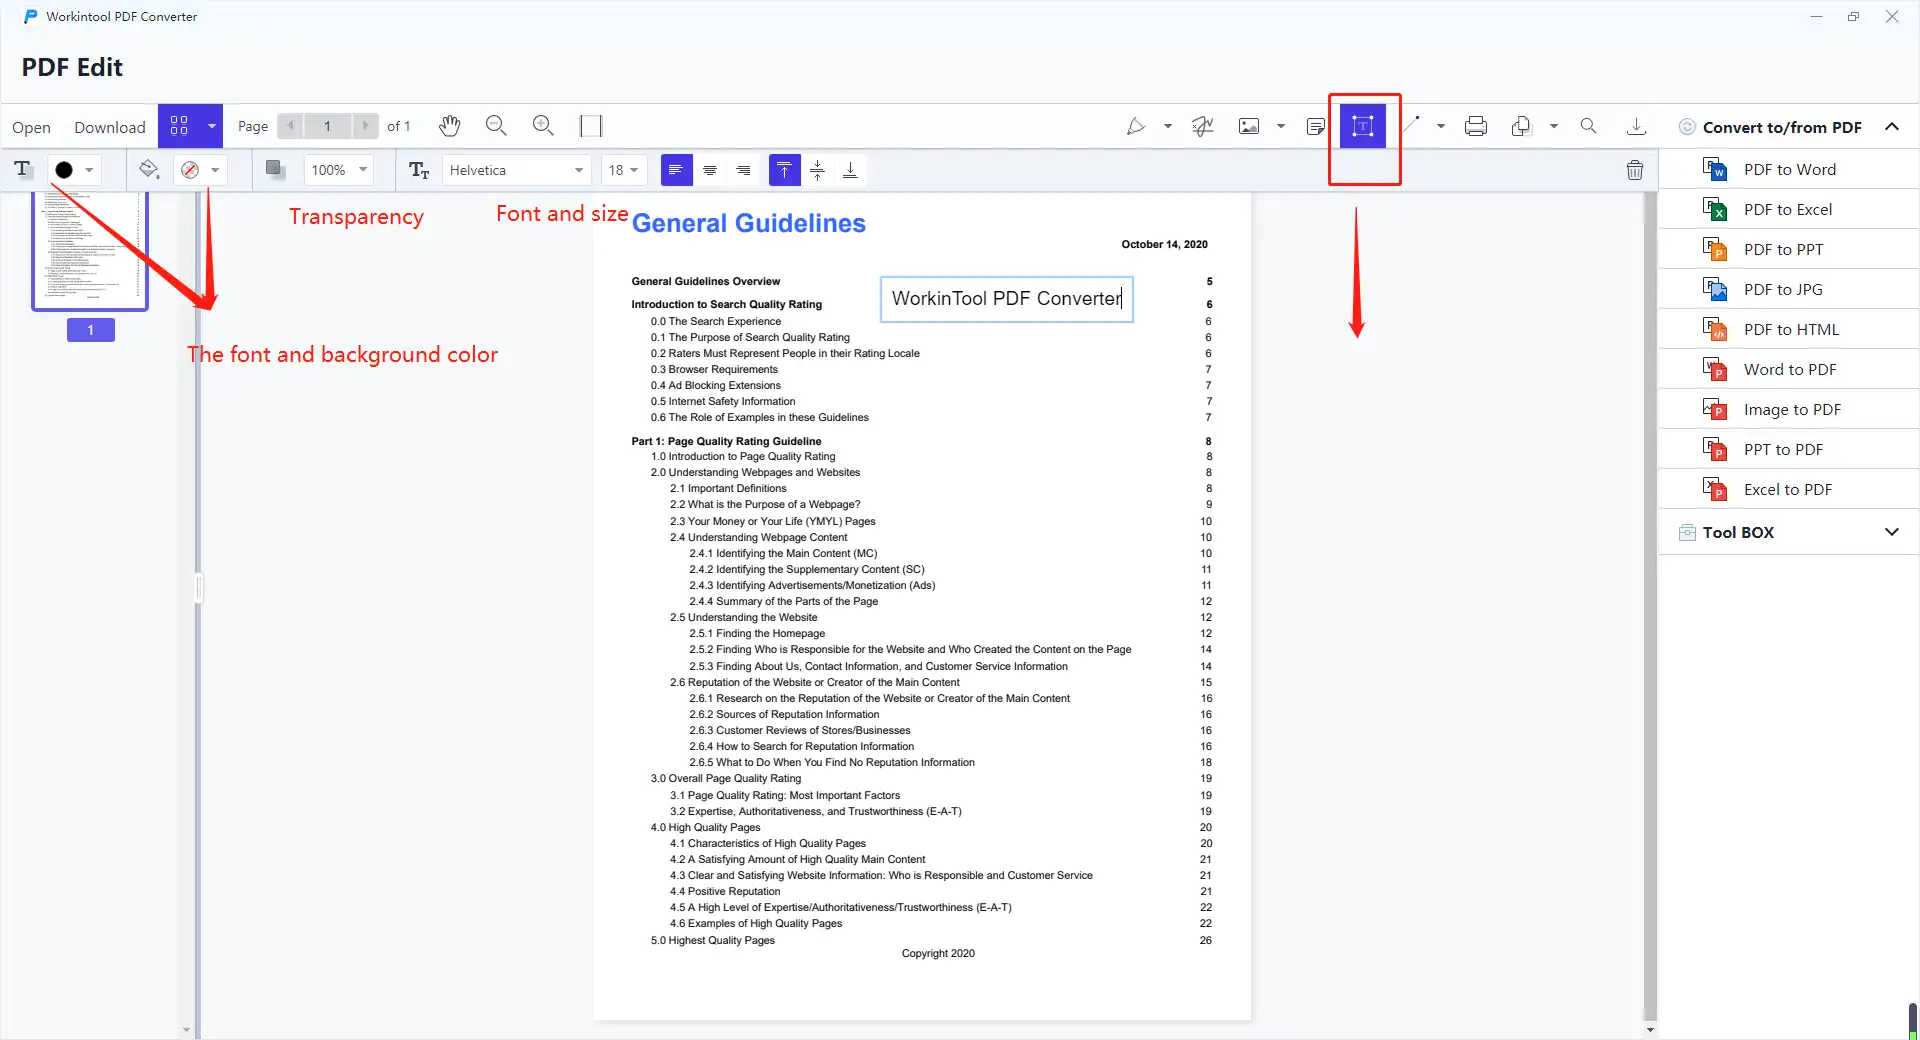 How to edit a PDF on Mac